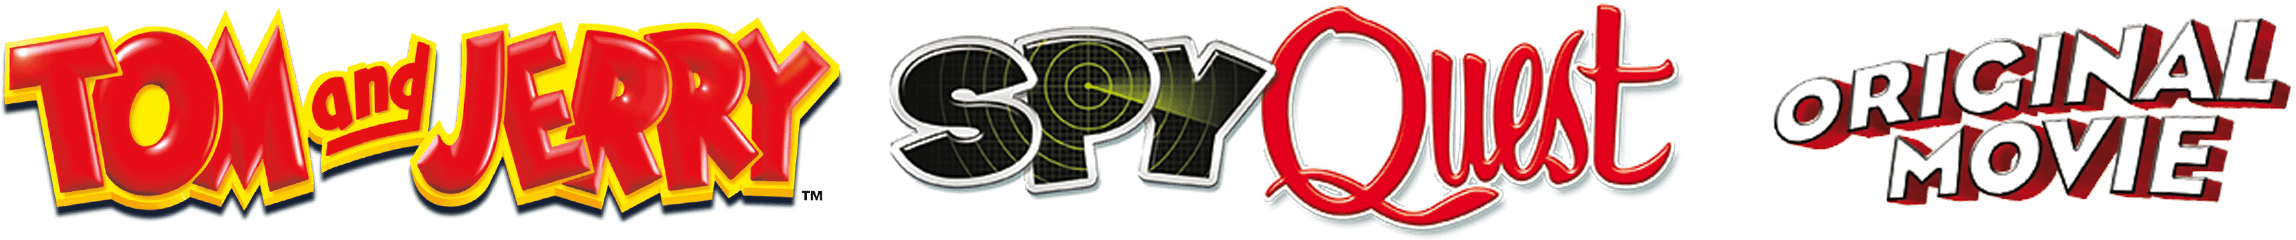 Tom and Jerry: Spy Quest logo